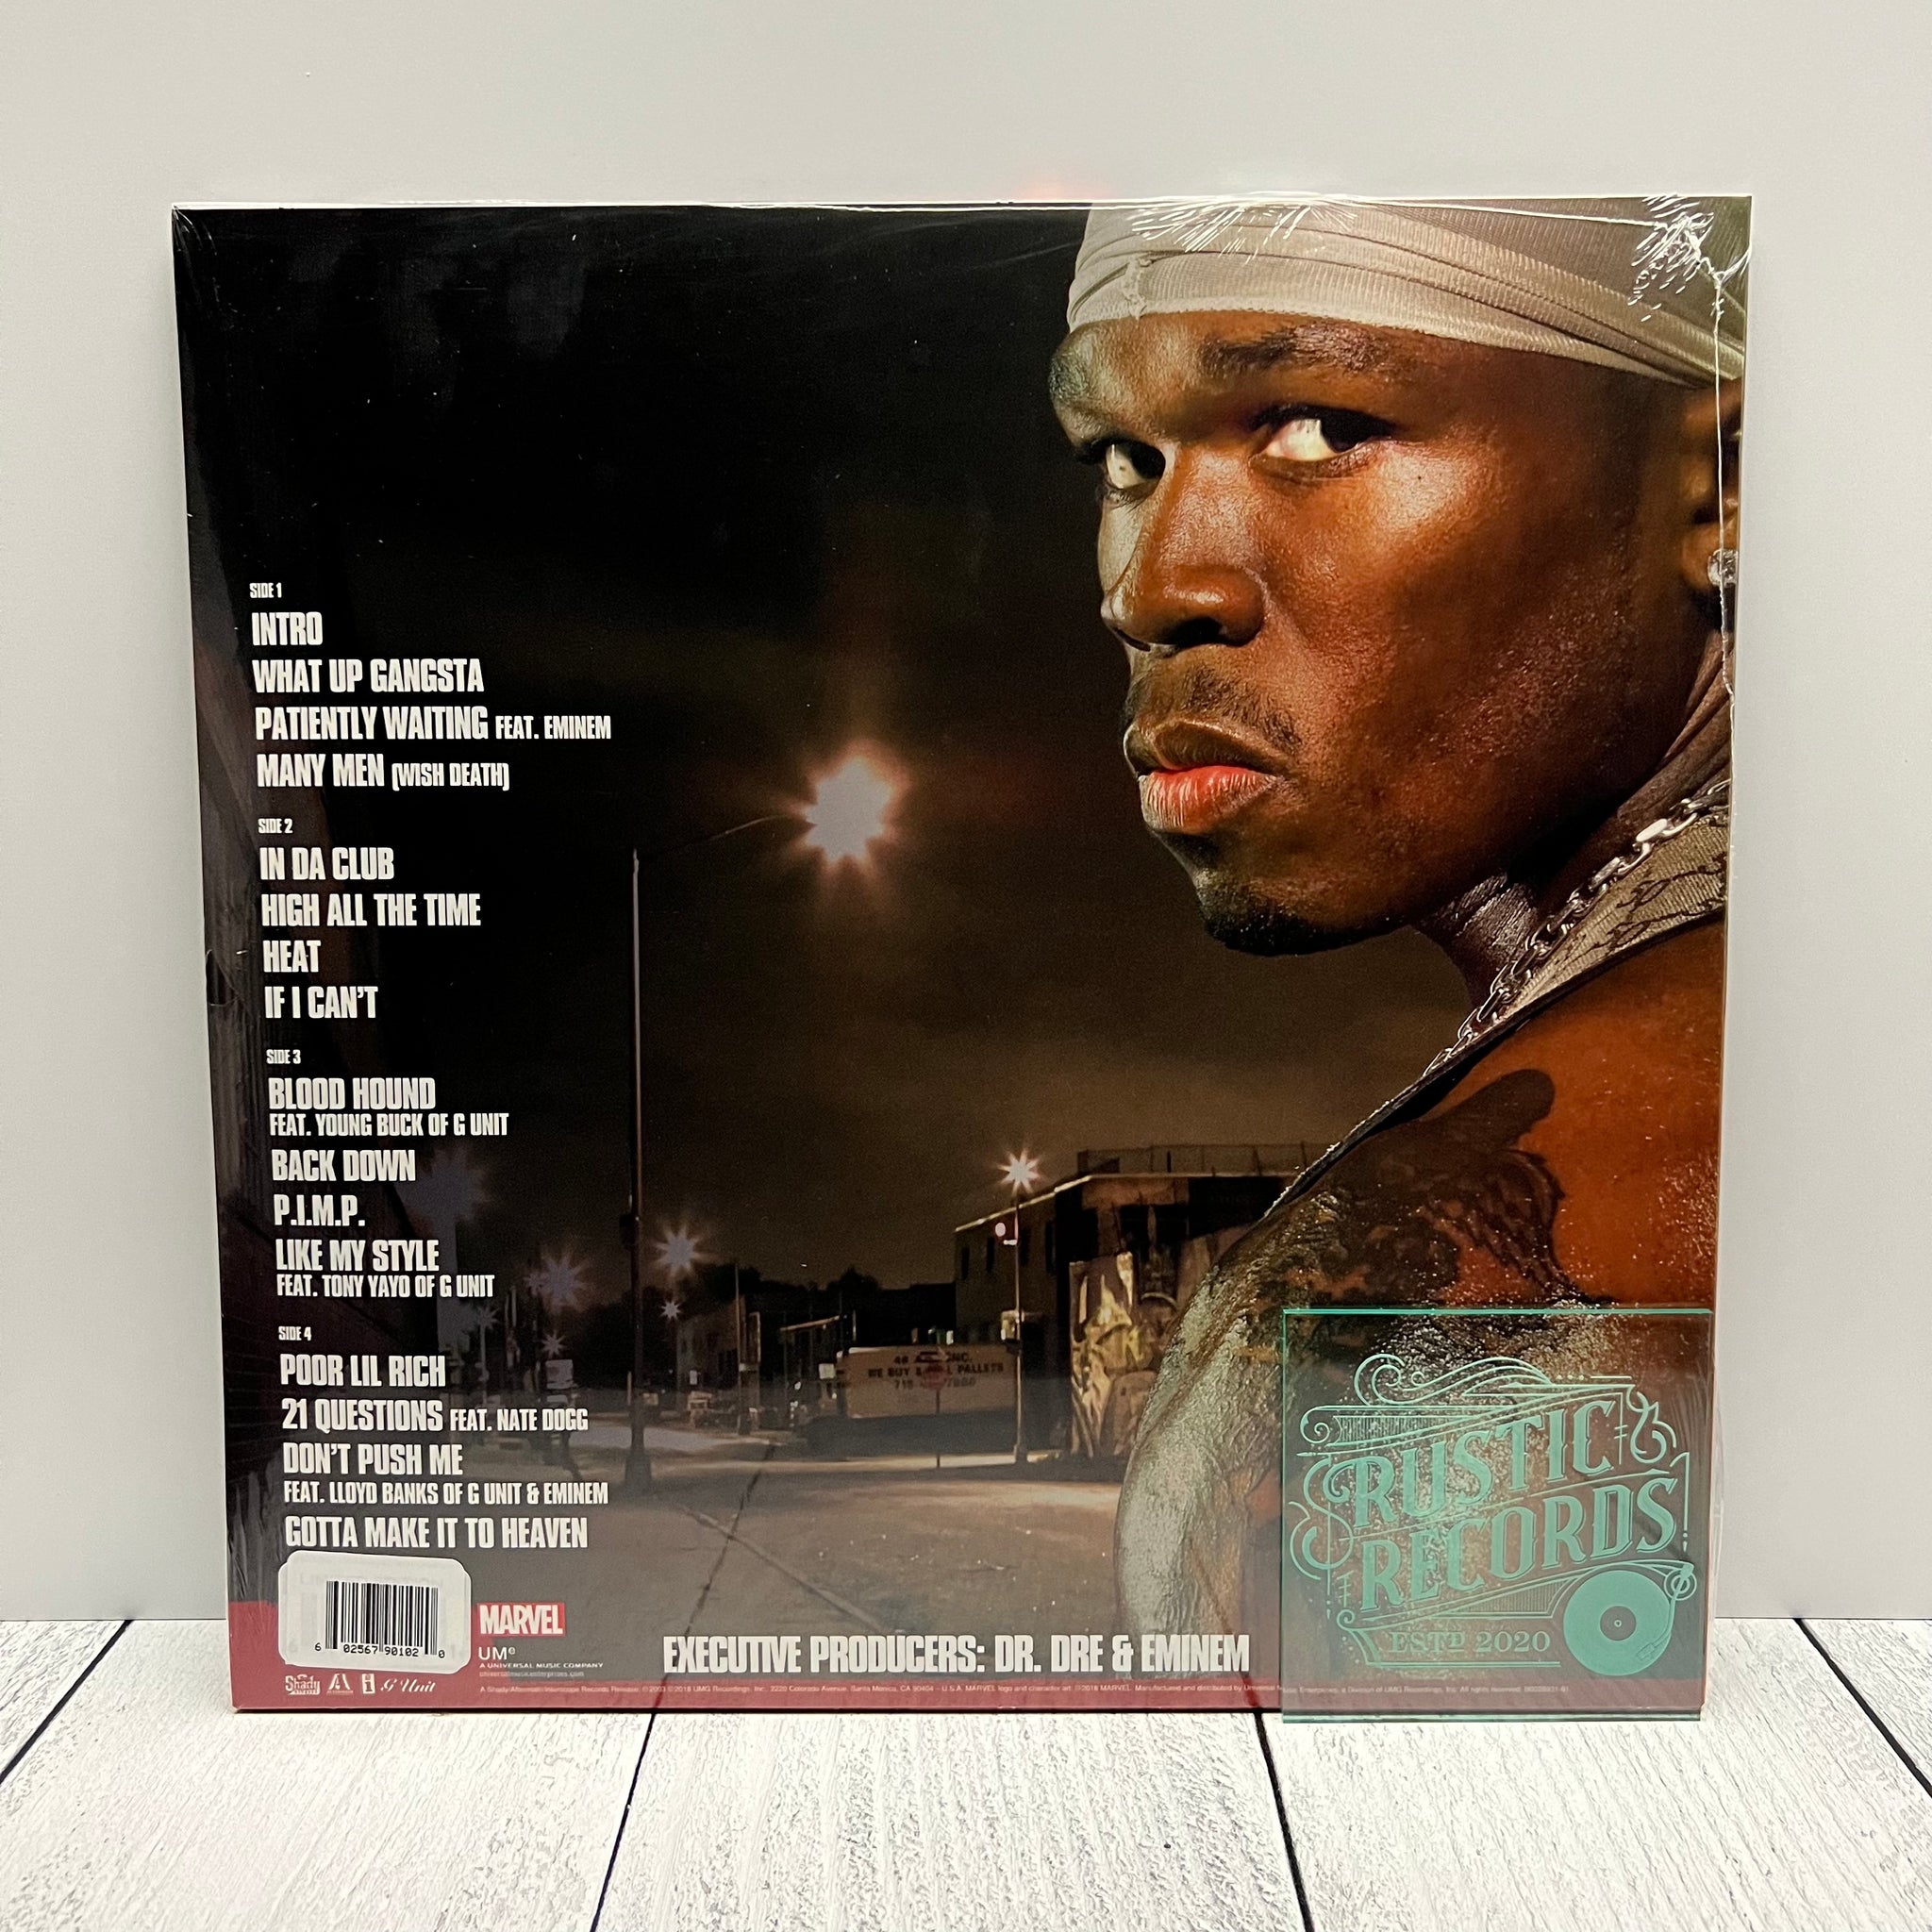 50 Cent - Get Rich Or Die Tryin' (Marvel Edition/Red Vinyl)